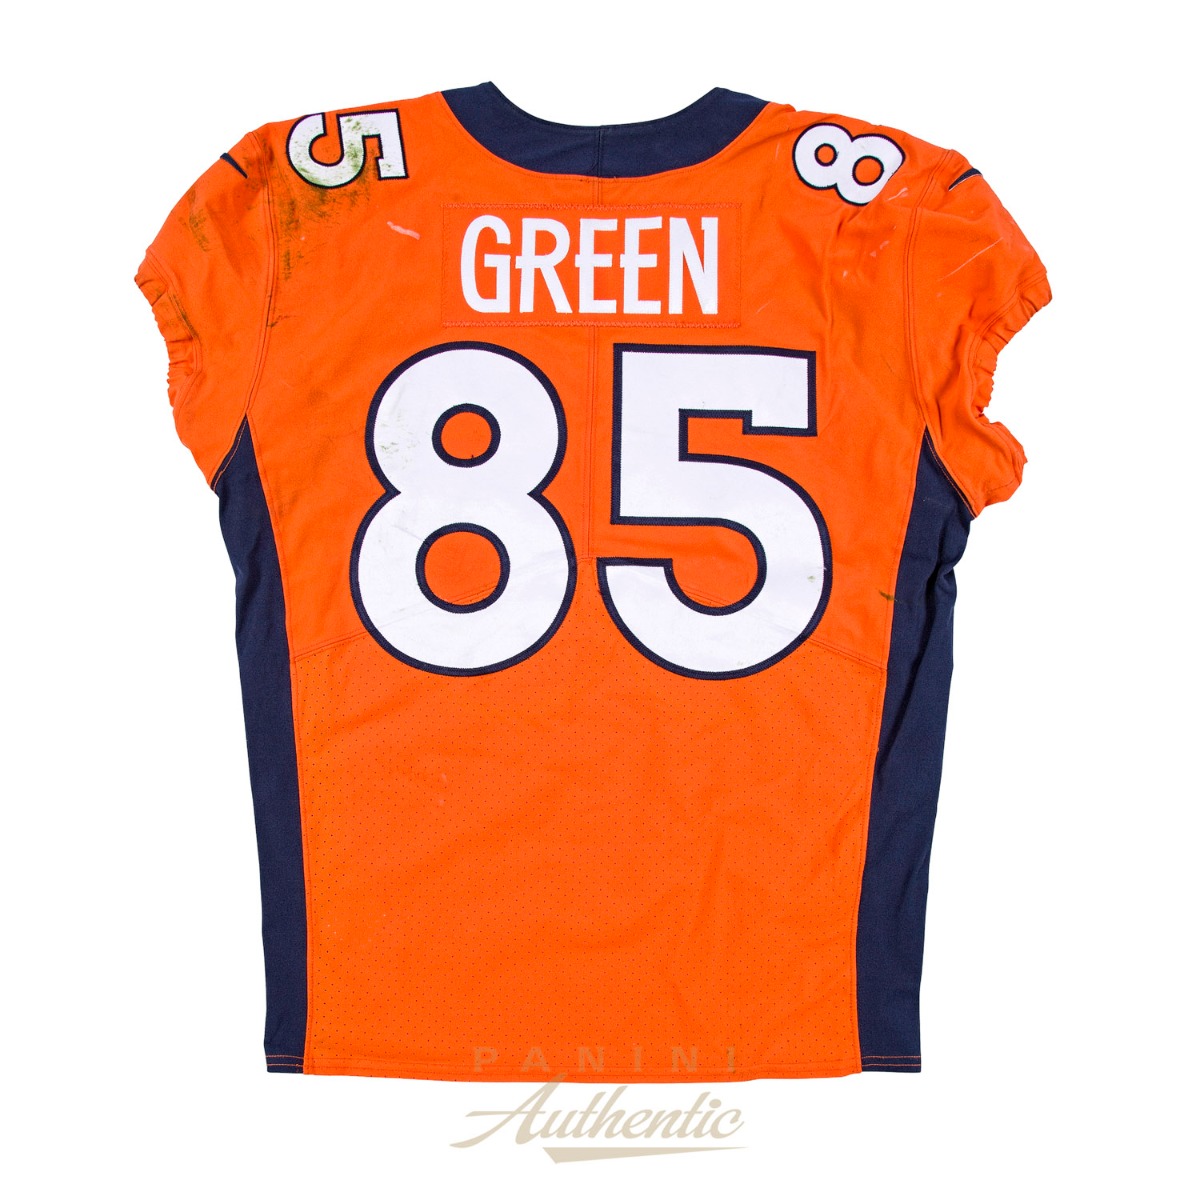 official broncos jersey